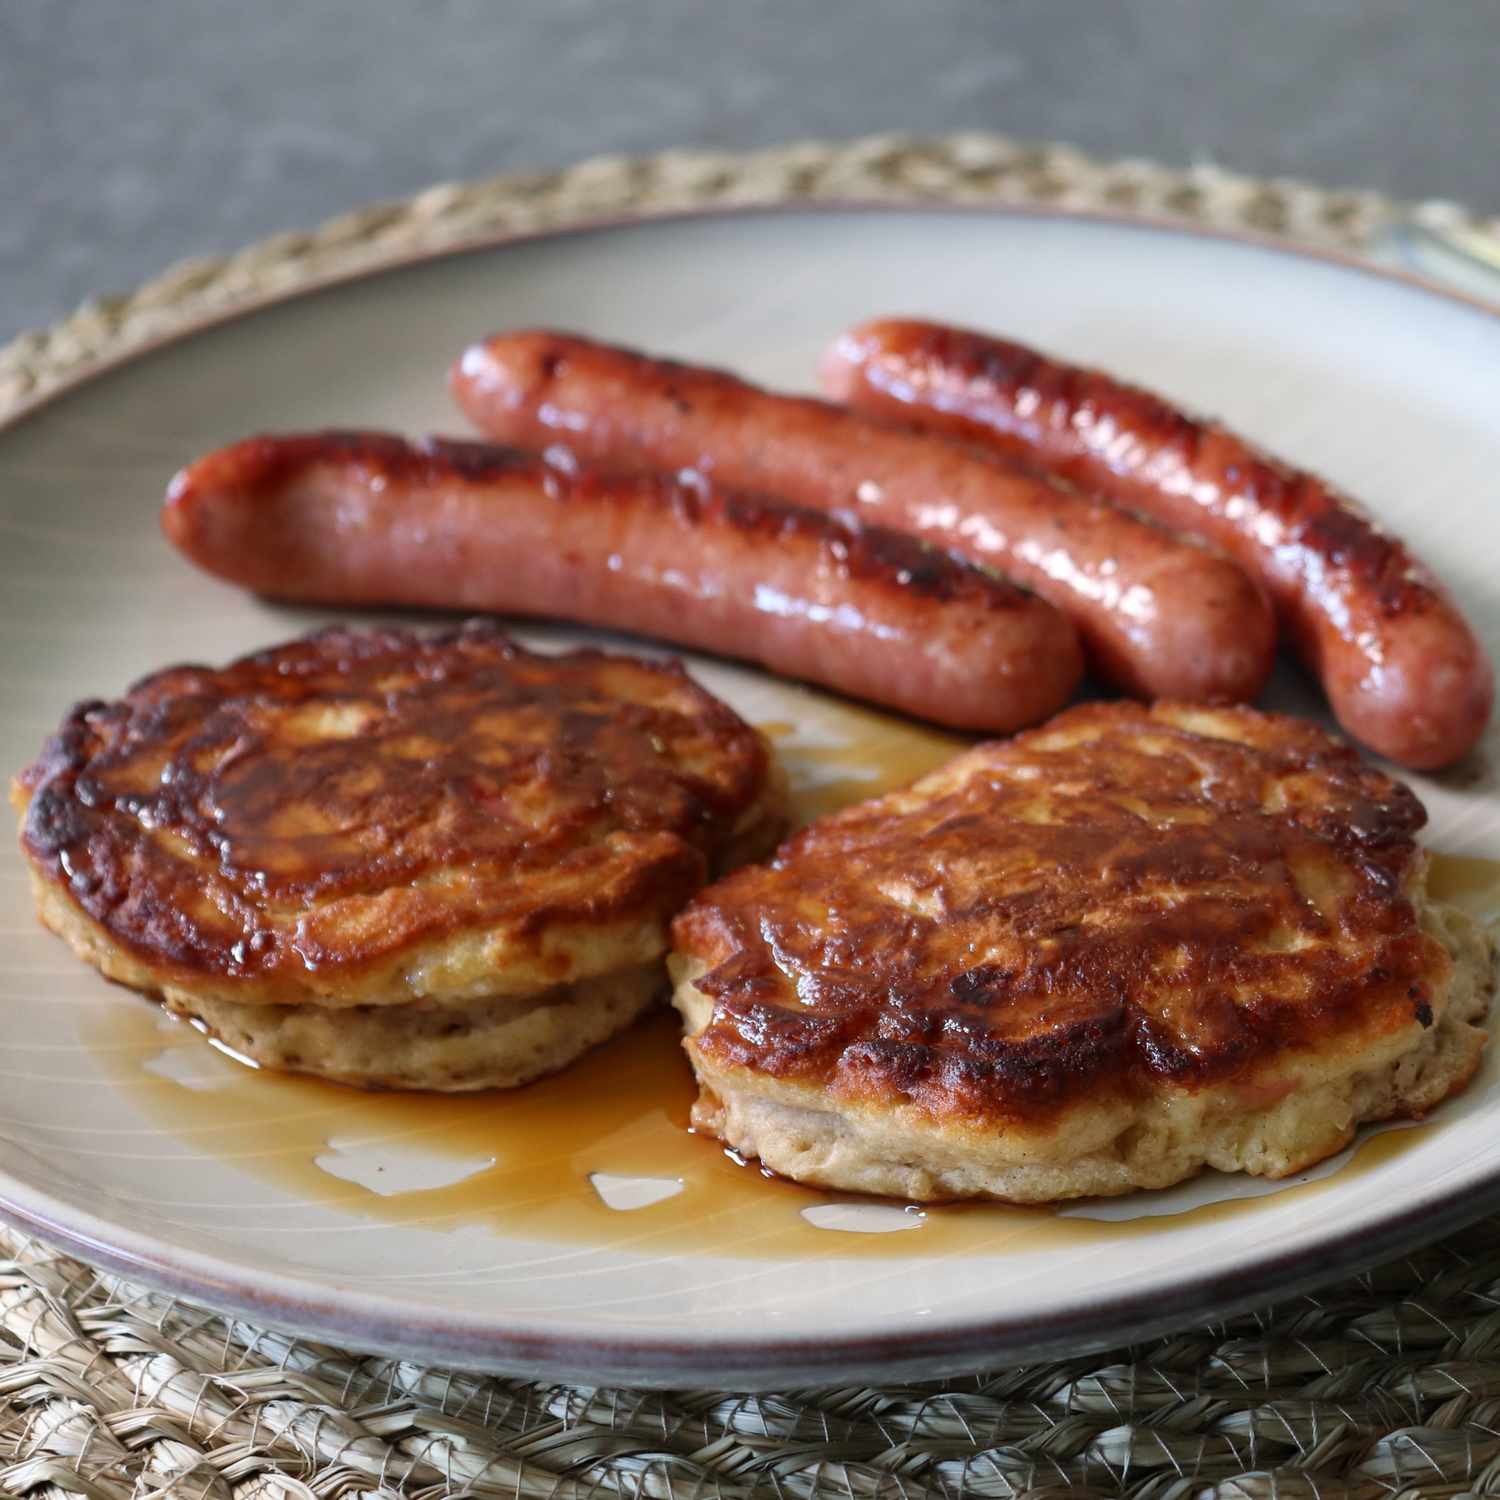 Apple Fritter Pancakes and sausages on plate